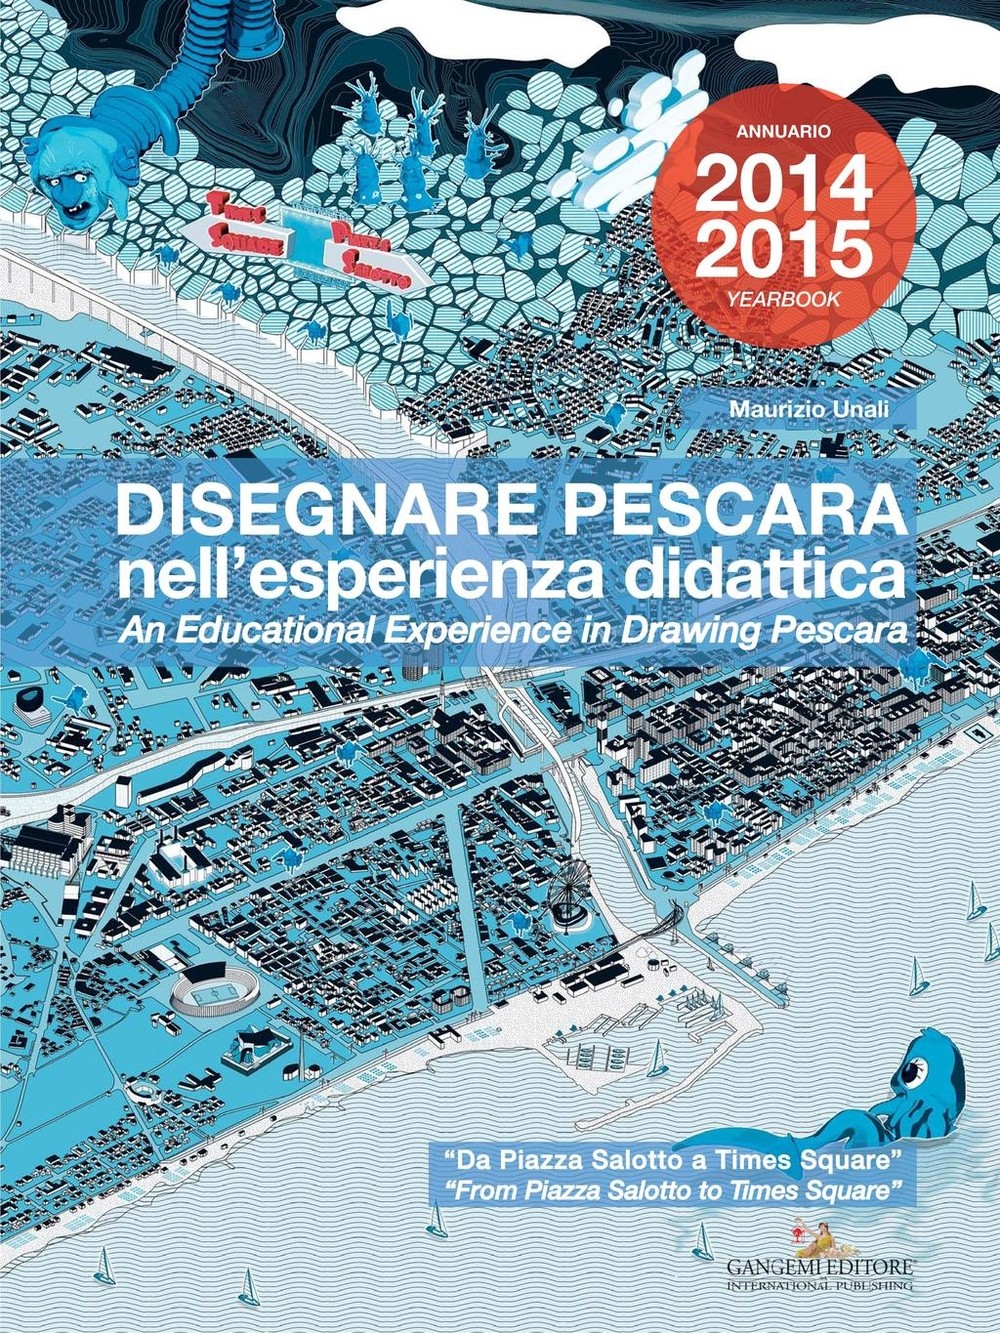 Disegnare Pescara nell'esperienza didattica. An educational experience in Drawing Pescara - Librerie.coop